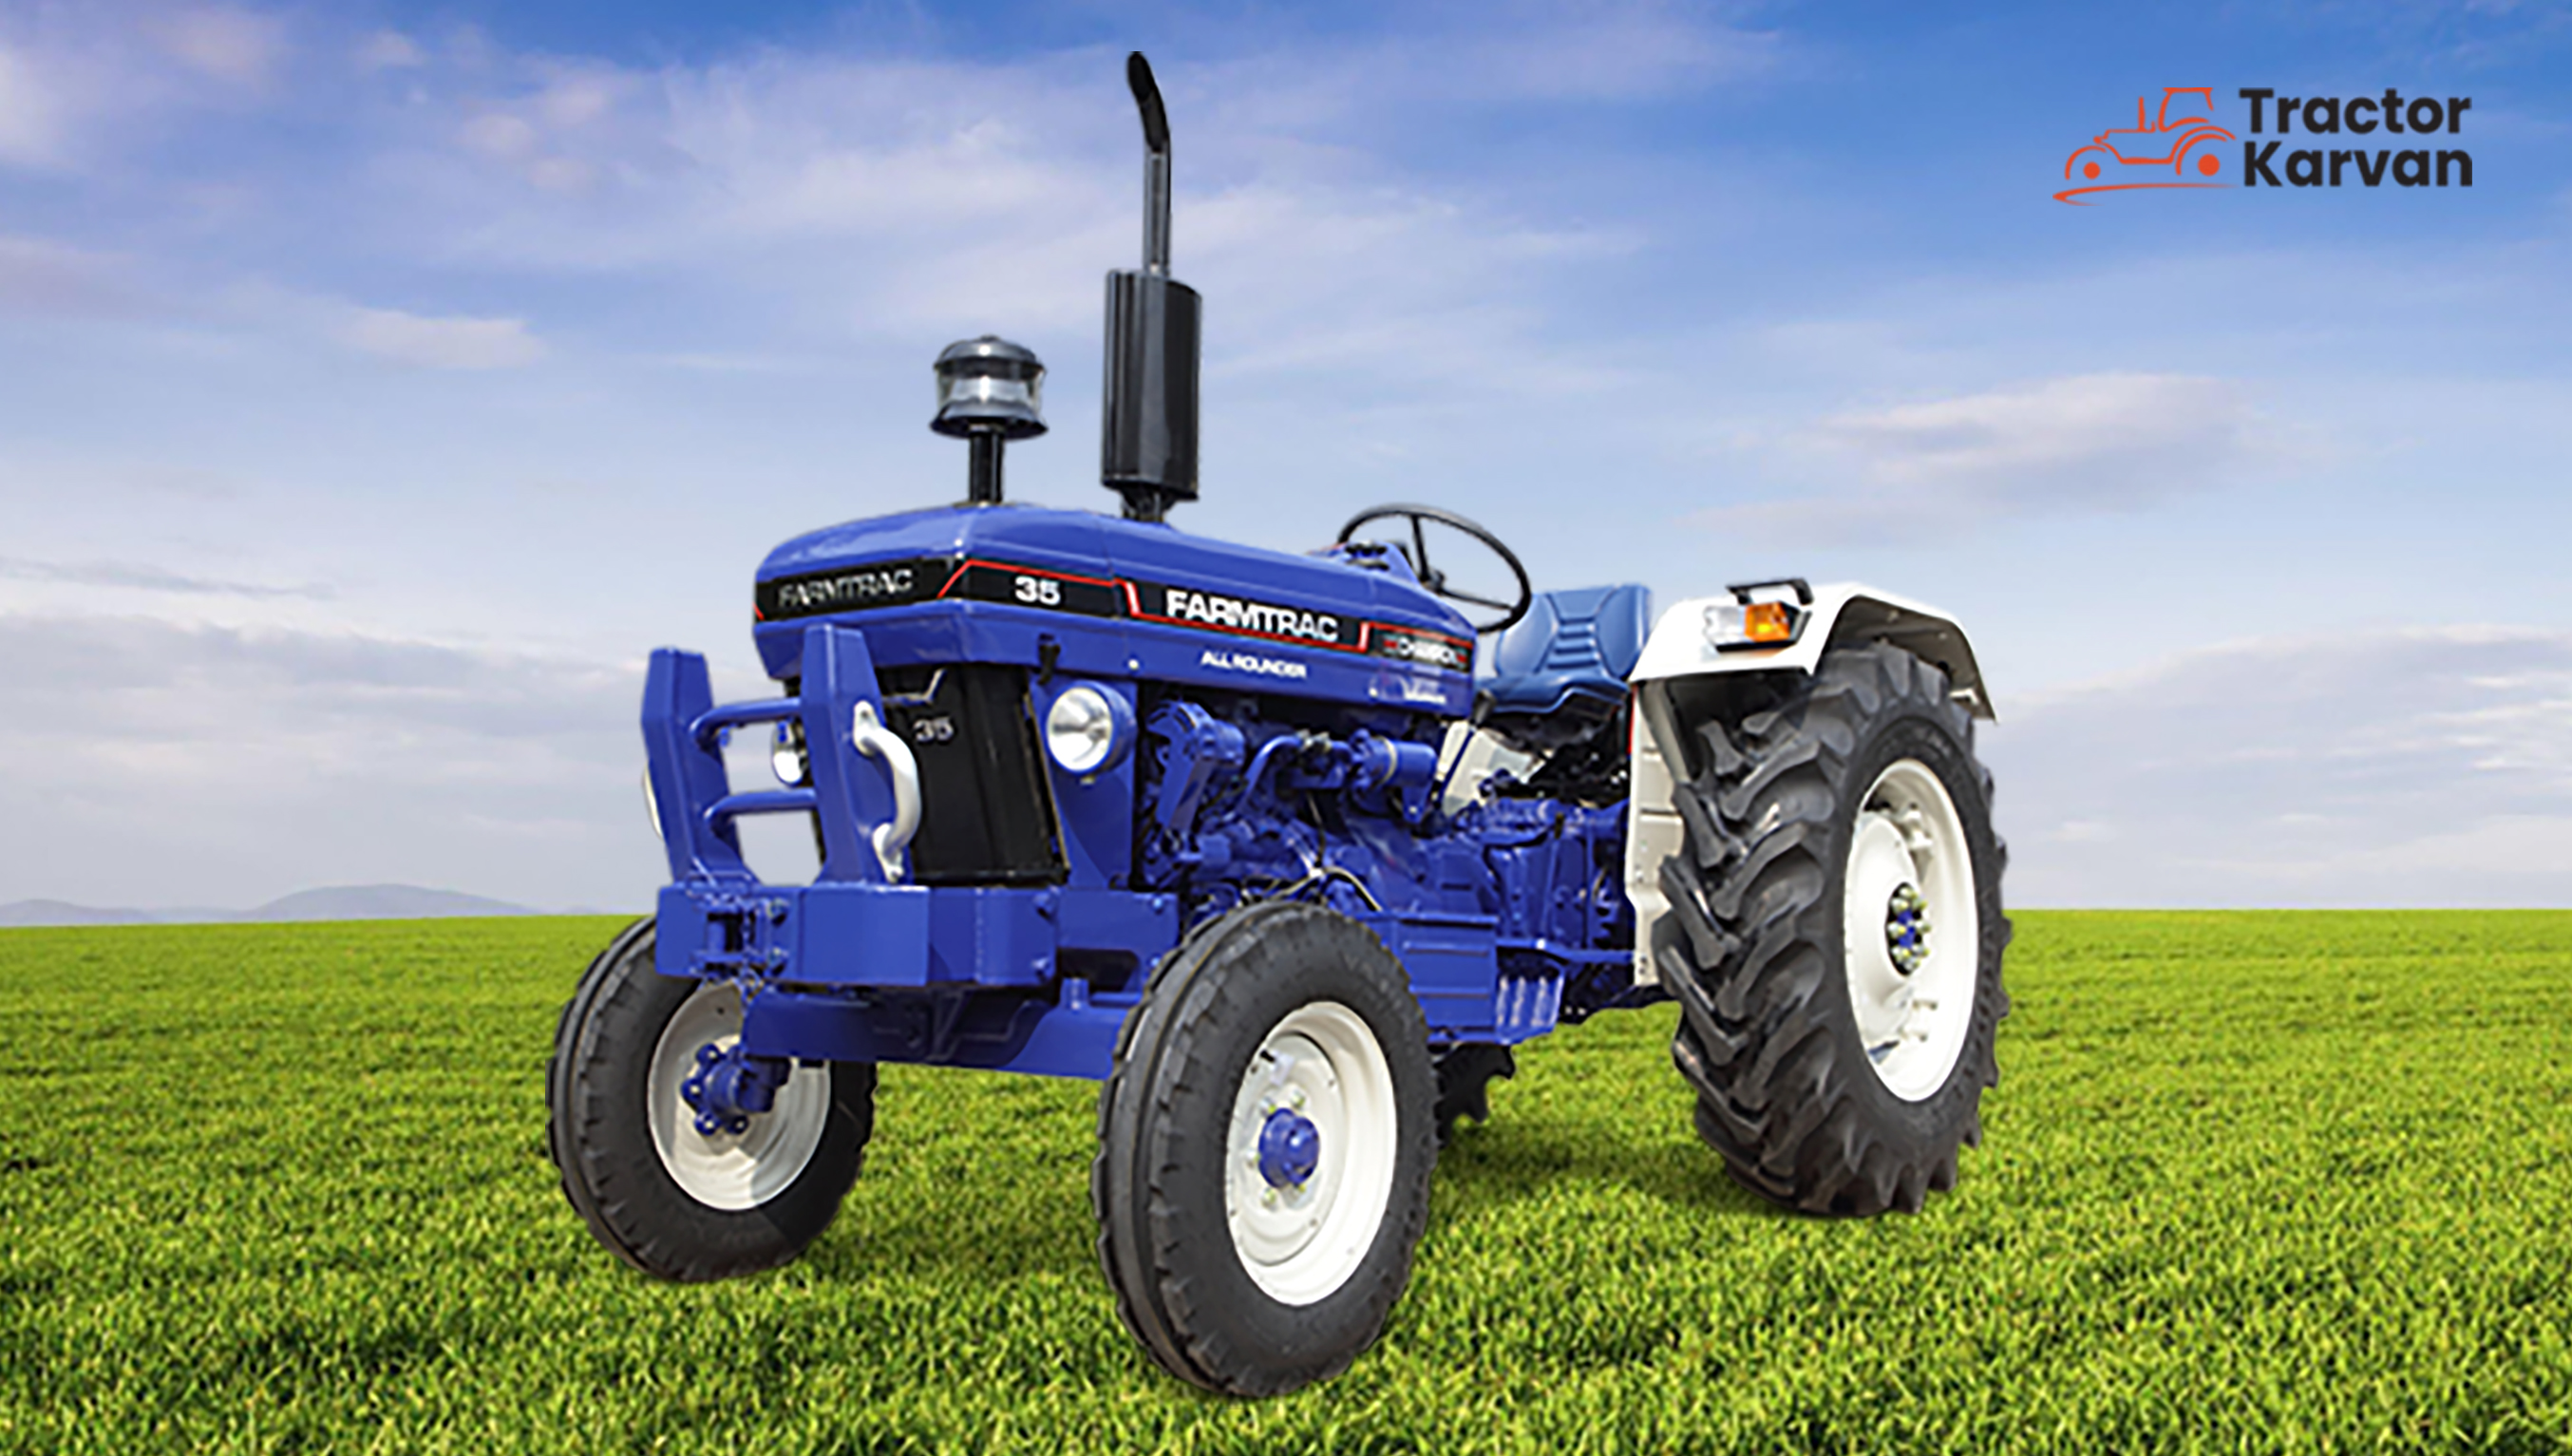 A thorough, feature- detailed description about tractorMachines EquipmentsIndustrial MachineryEast DelhiOthers